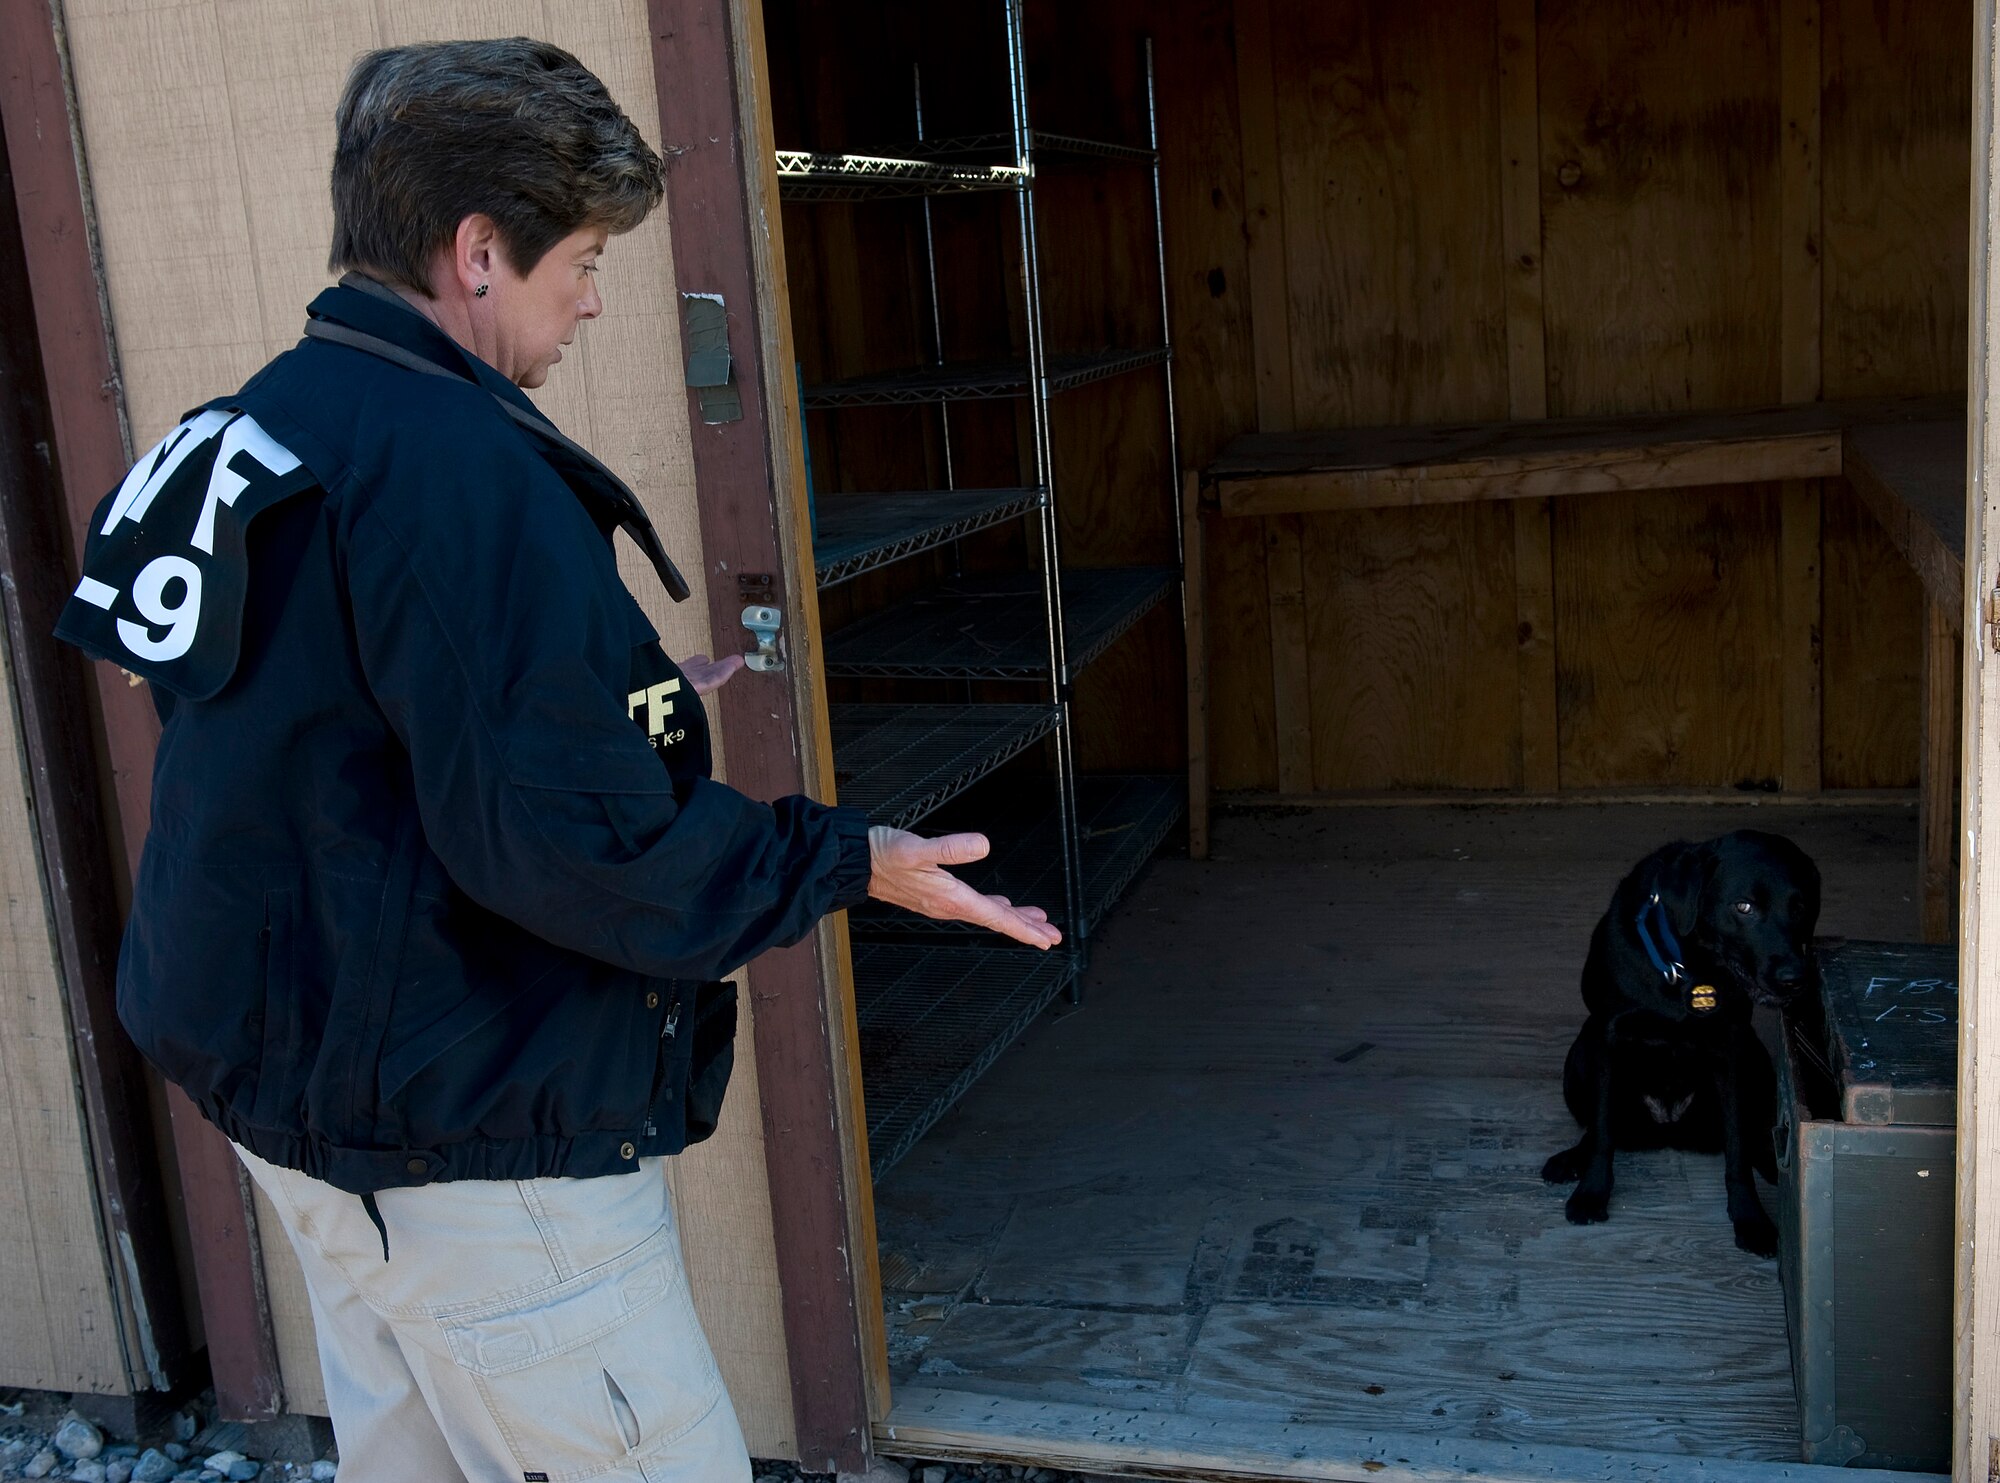 NELLIS AIR FORCE BASE, Nev.-- Lauren Marakas, senior special agent canine handler from the Bureau of Alcohol, Tobacco, Firearms, and Explosives, questions Ruthie, an explosives detection canine, to find where explosives are hidden during a joint explosive detection training exercise Dec. 16. Military working dog handlers from the 99th Security Forces Squadron worked with 25 canine teams from the Las Vegas area.(U.S. Air Force photo by Senior Airman Brett Clashman)